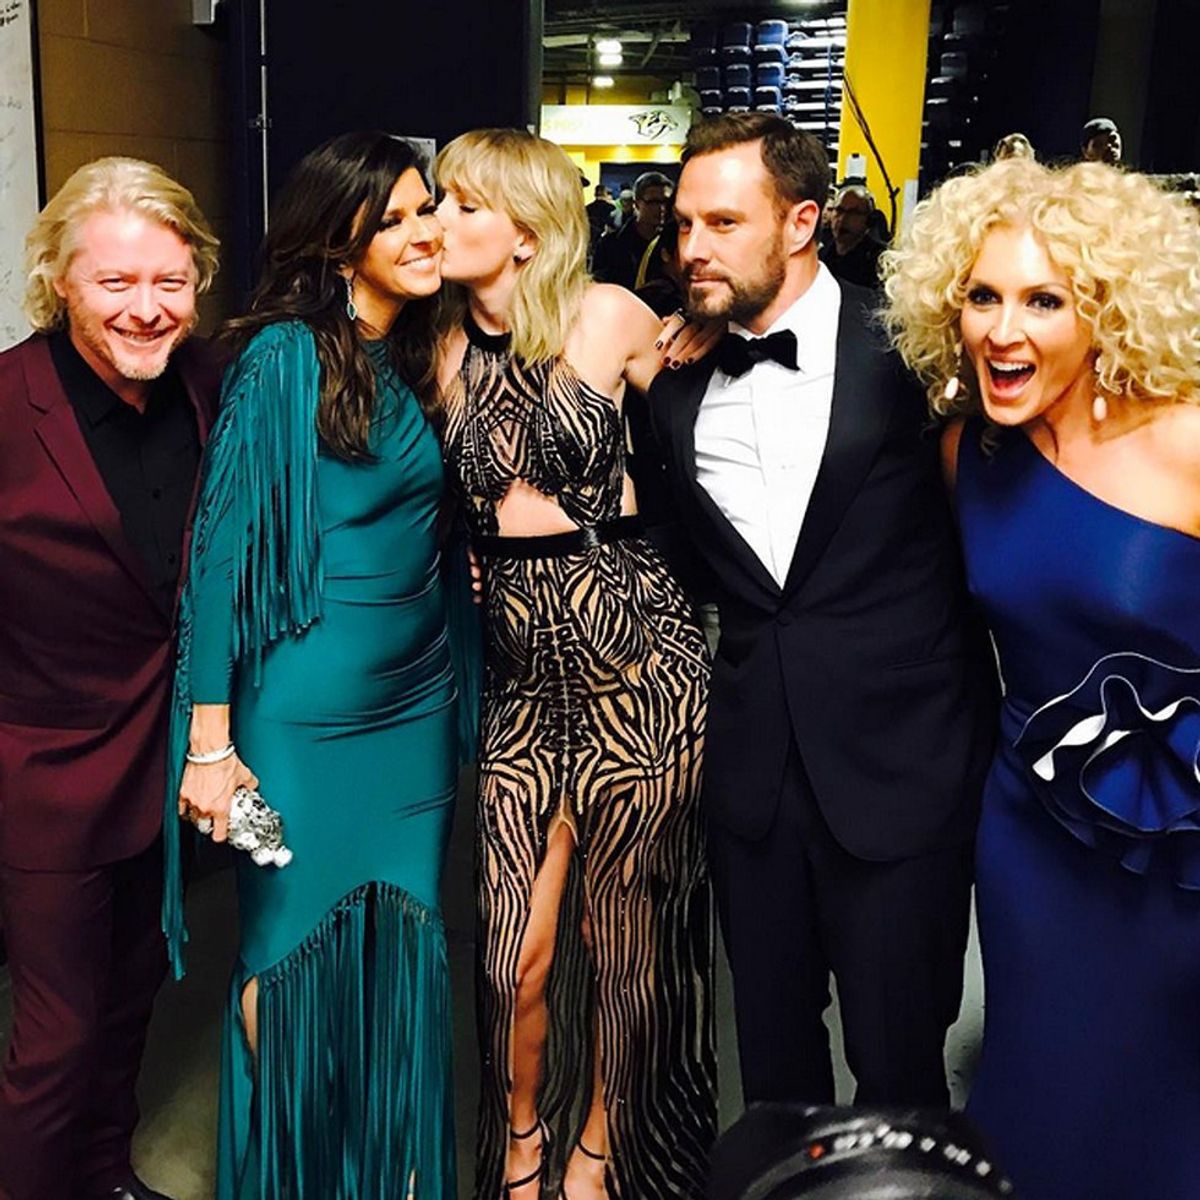 Taylor Swift And Little Big Town's "Better Man": The Song That Captures ALL The Feels When You Know It's Time To Say Goodbye